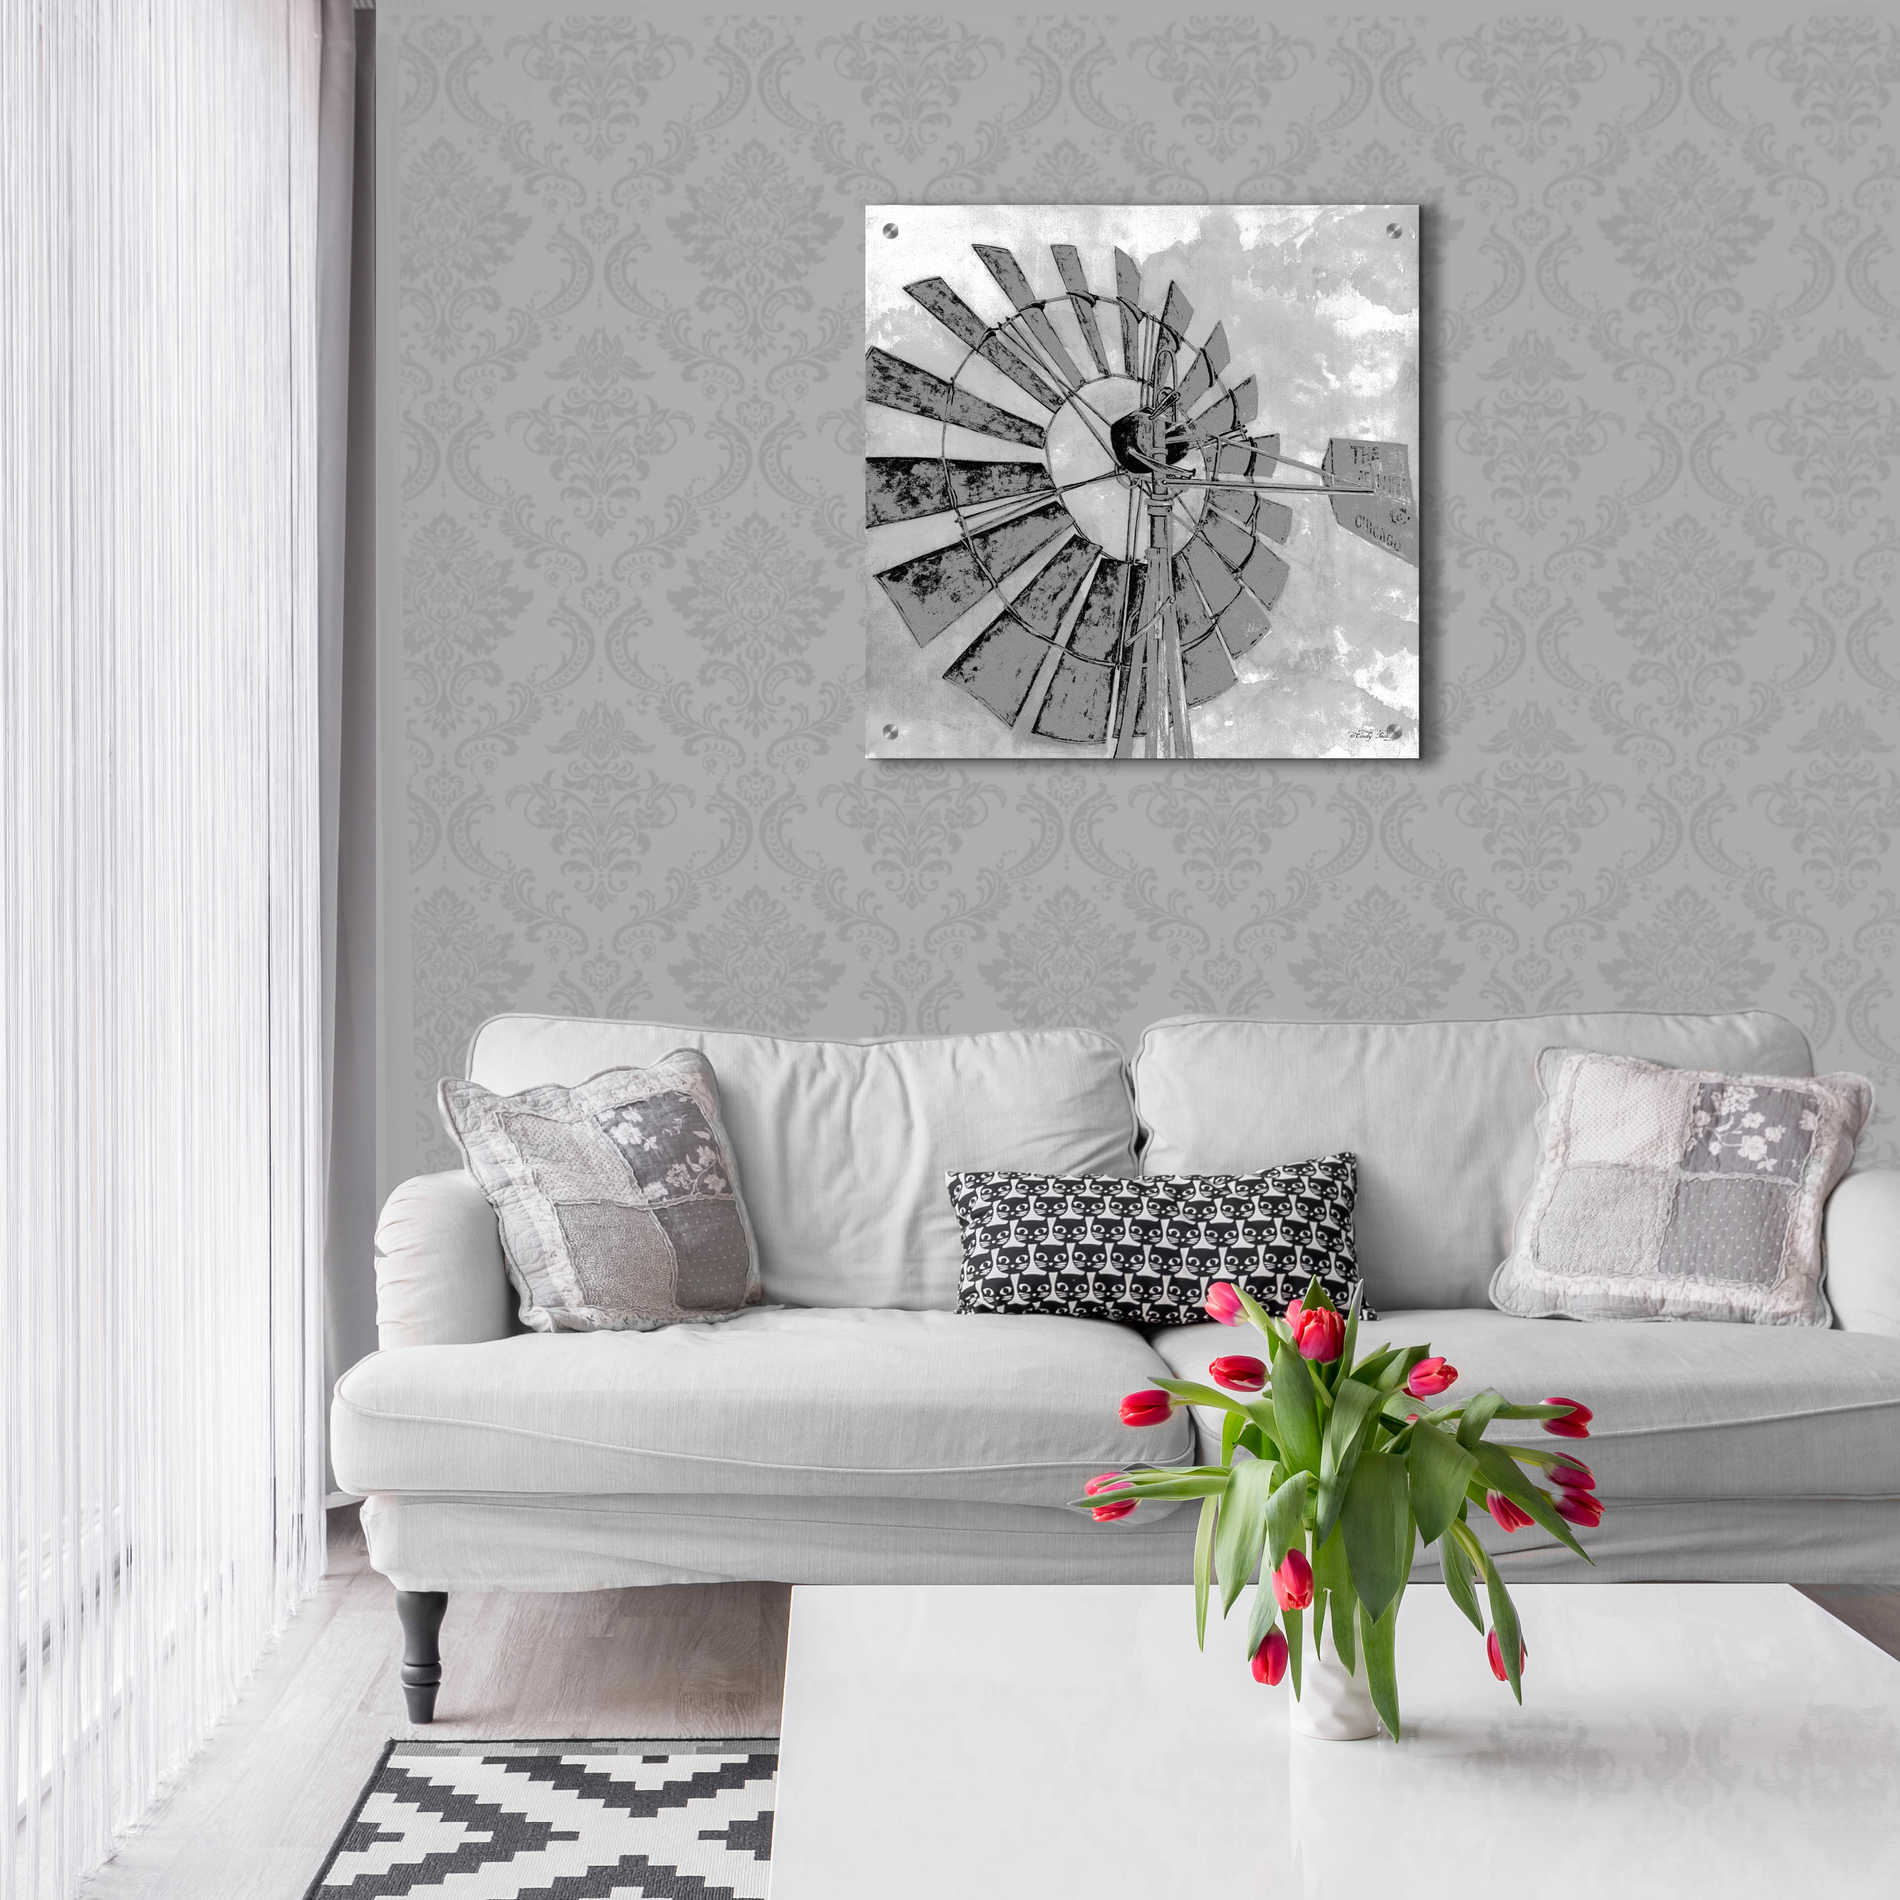 Epic Art 'Windmill Rotor' by Cindy Jacobs, Acrylic Glass Wall Art,24x24